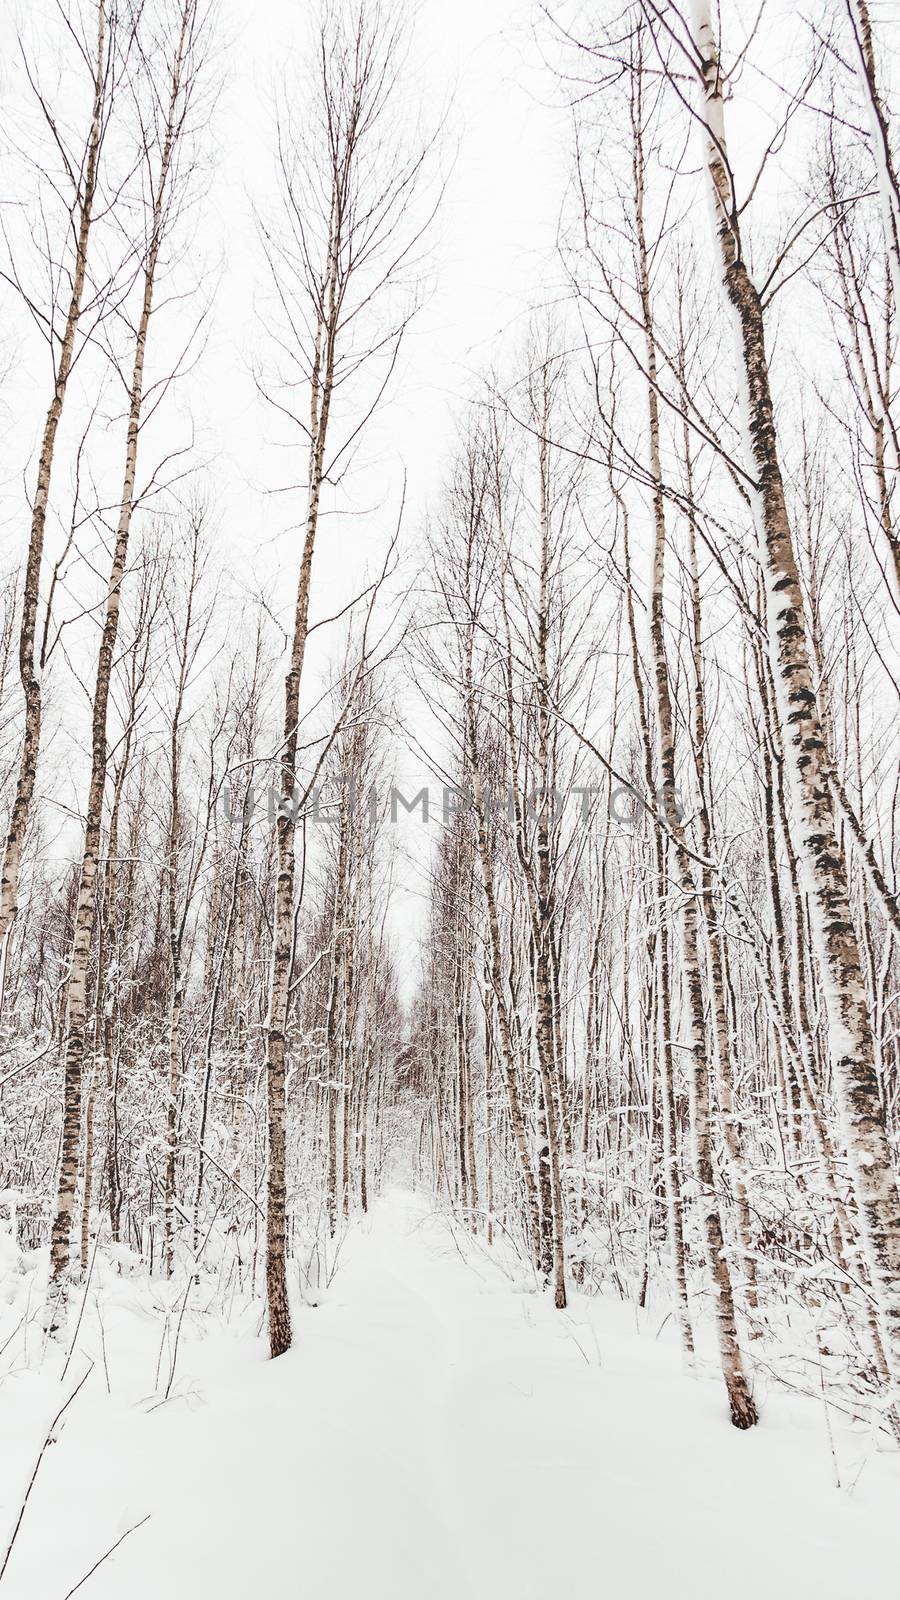 Winter forest. Snowy wood. Path between trees. Winter natural ba by aksenovko